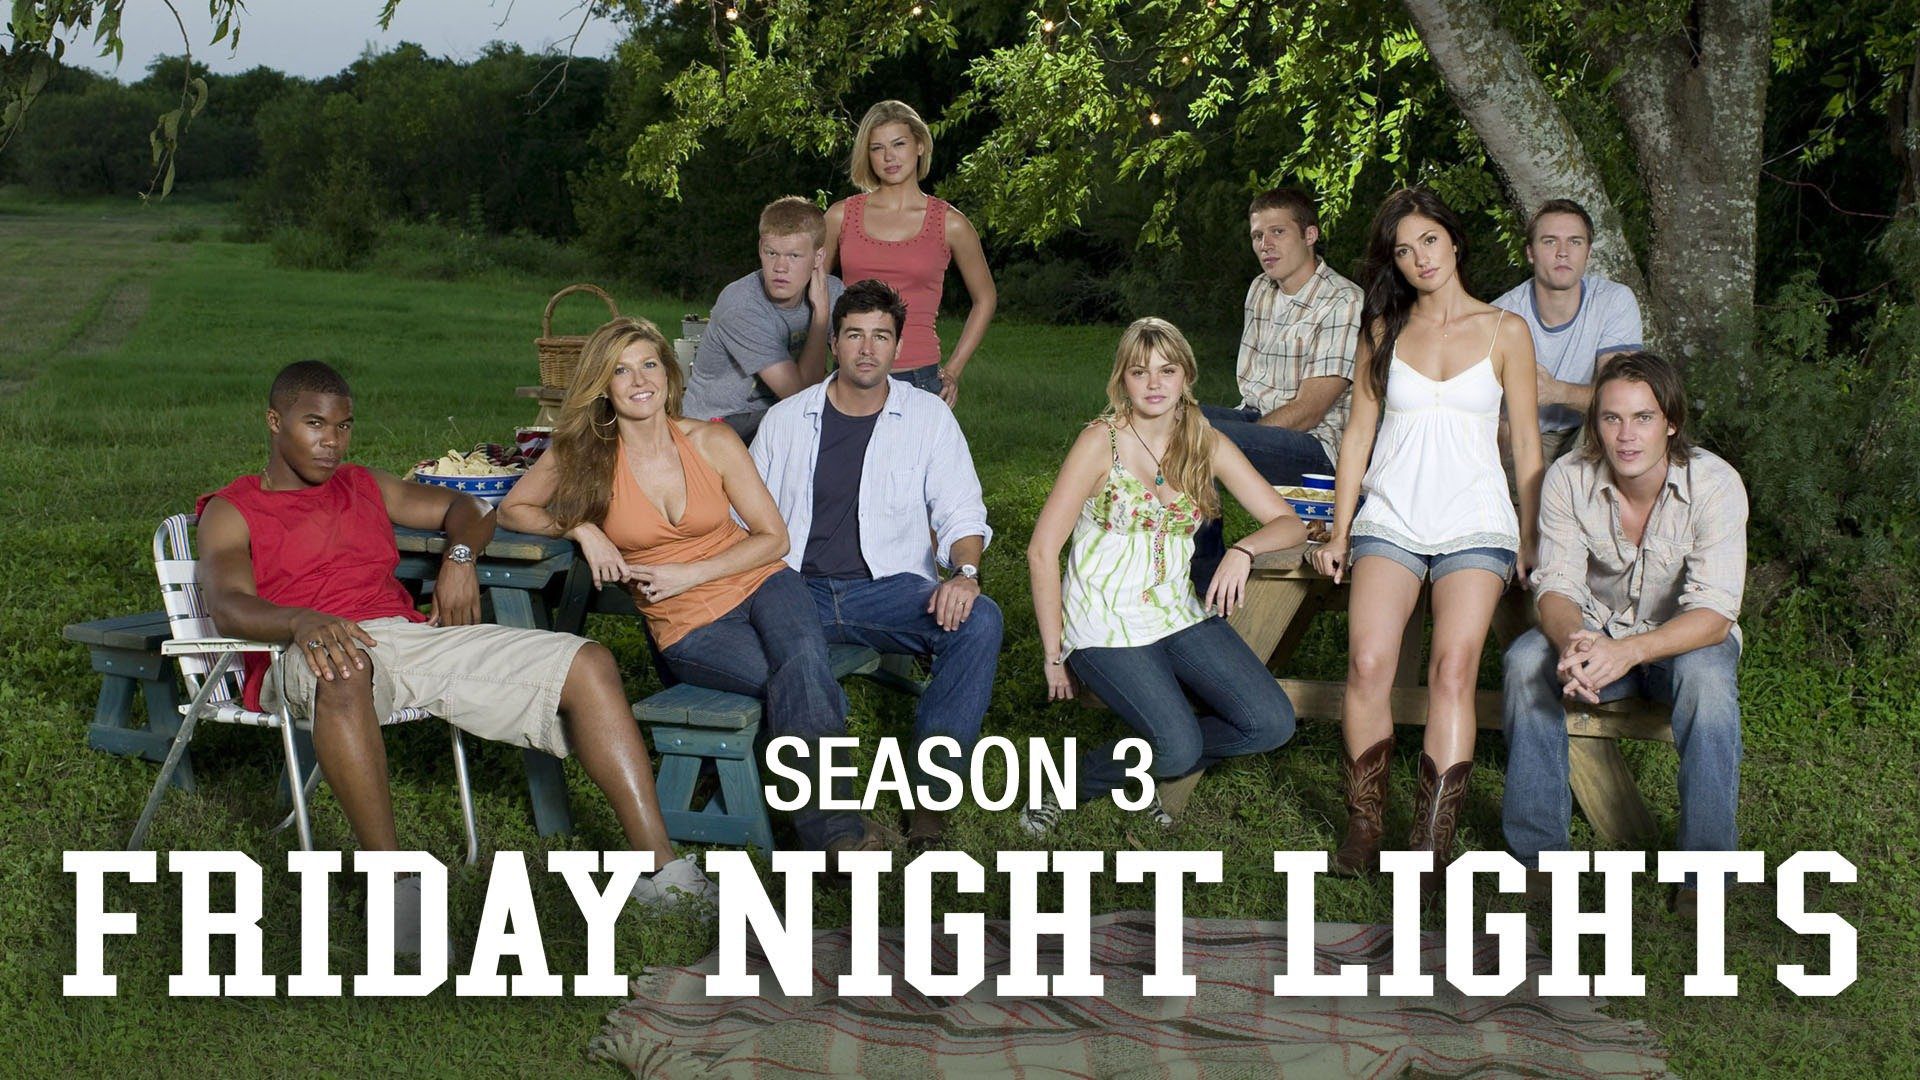 Watch the series 'Friday Night Lights' if you like 'This Is Us'